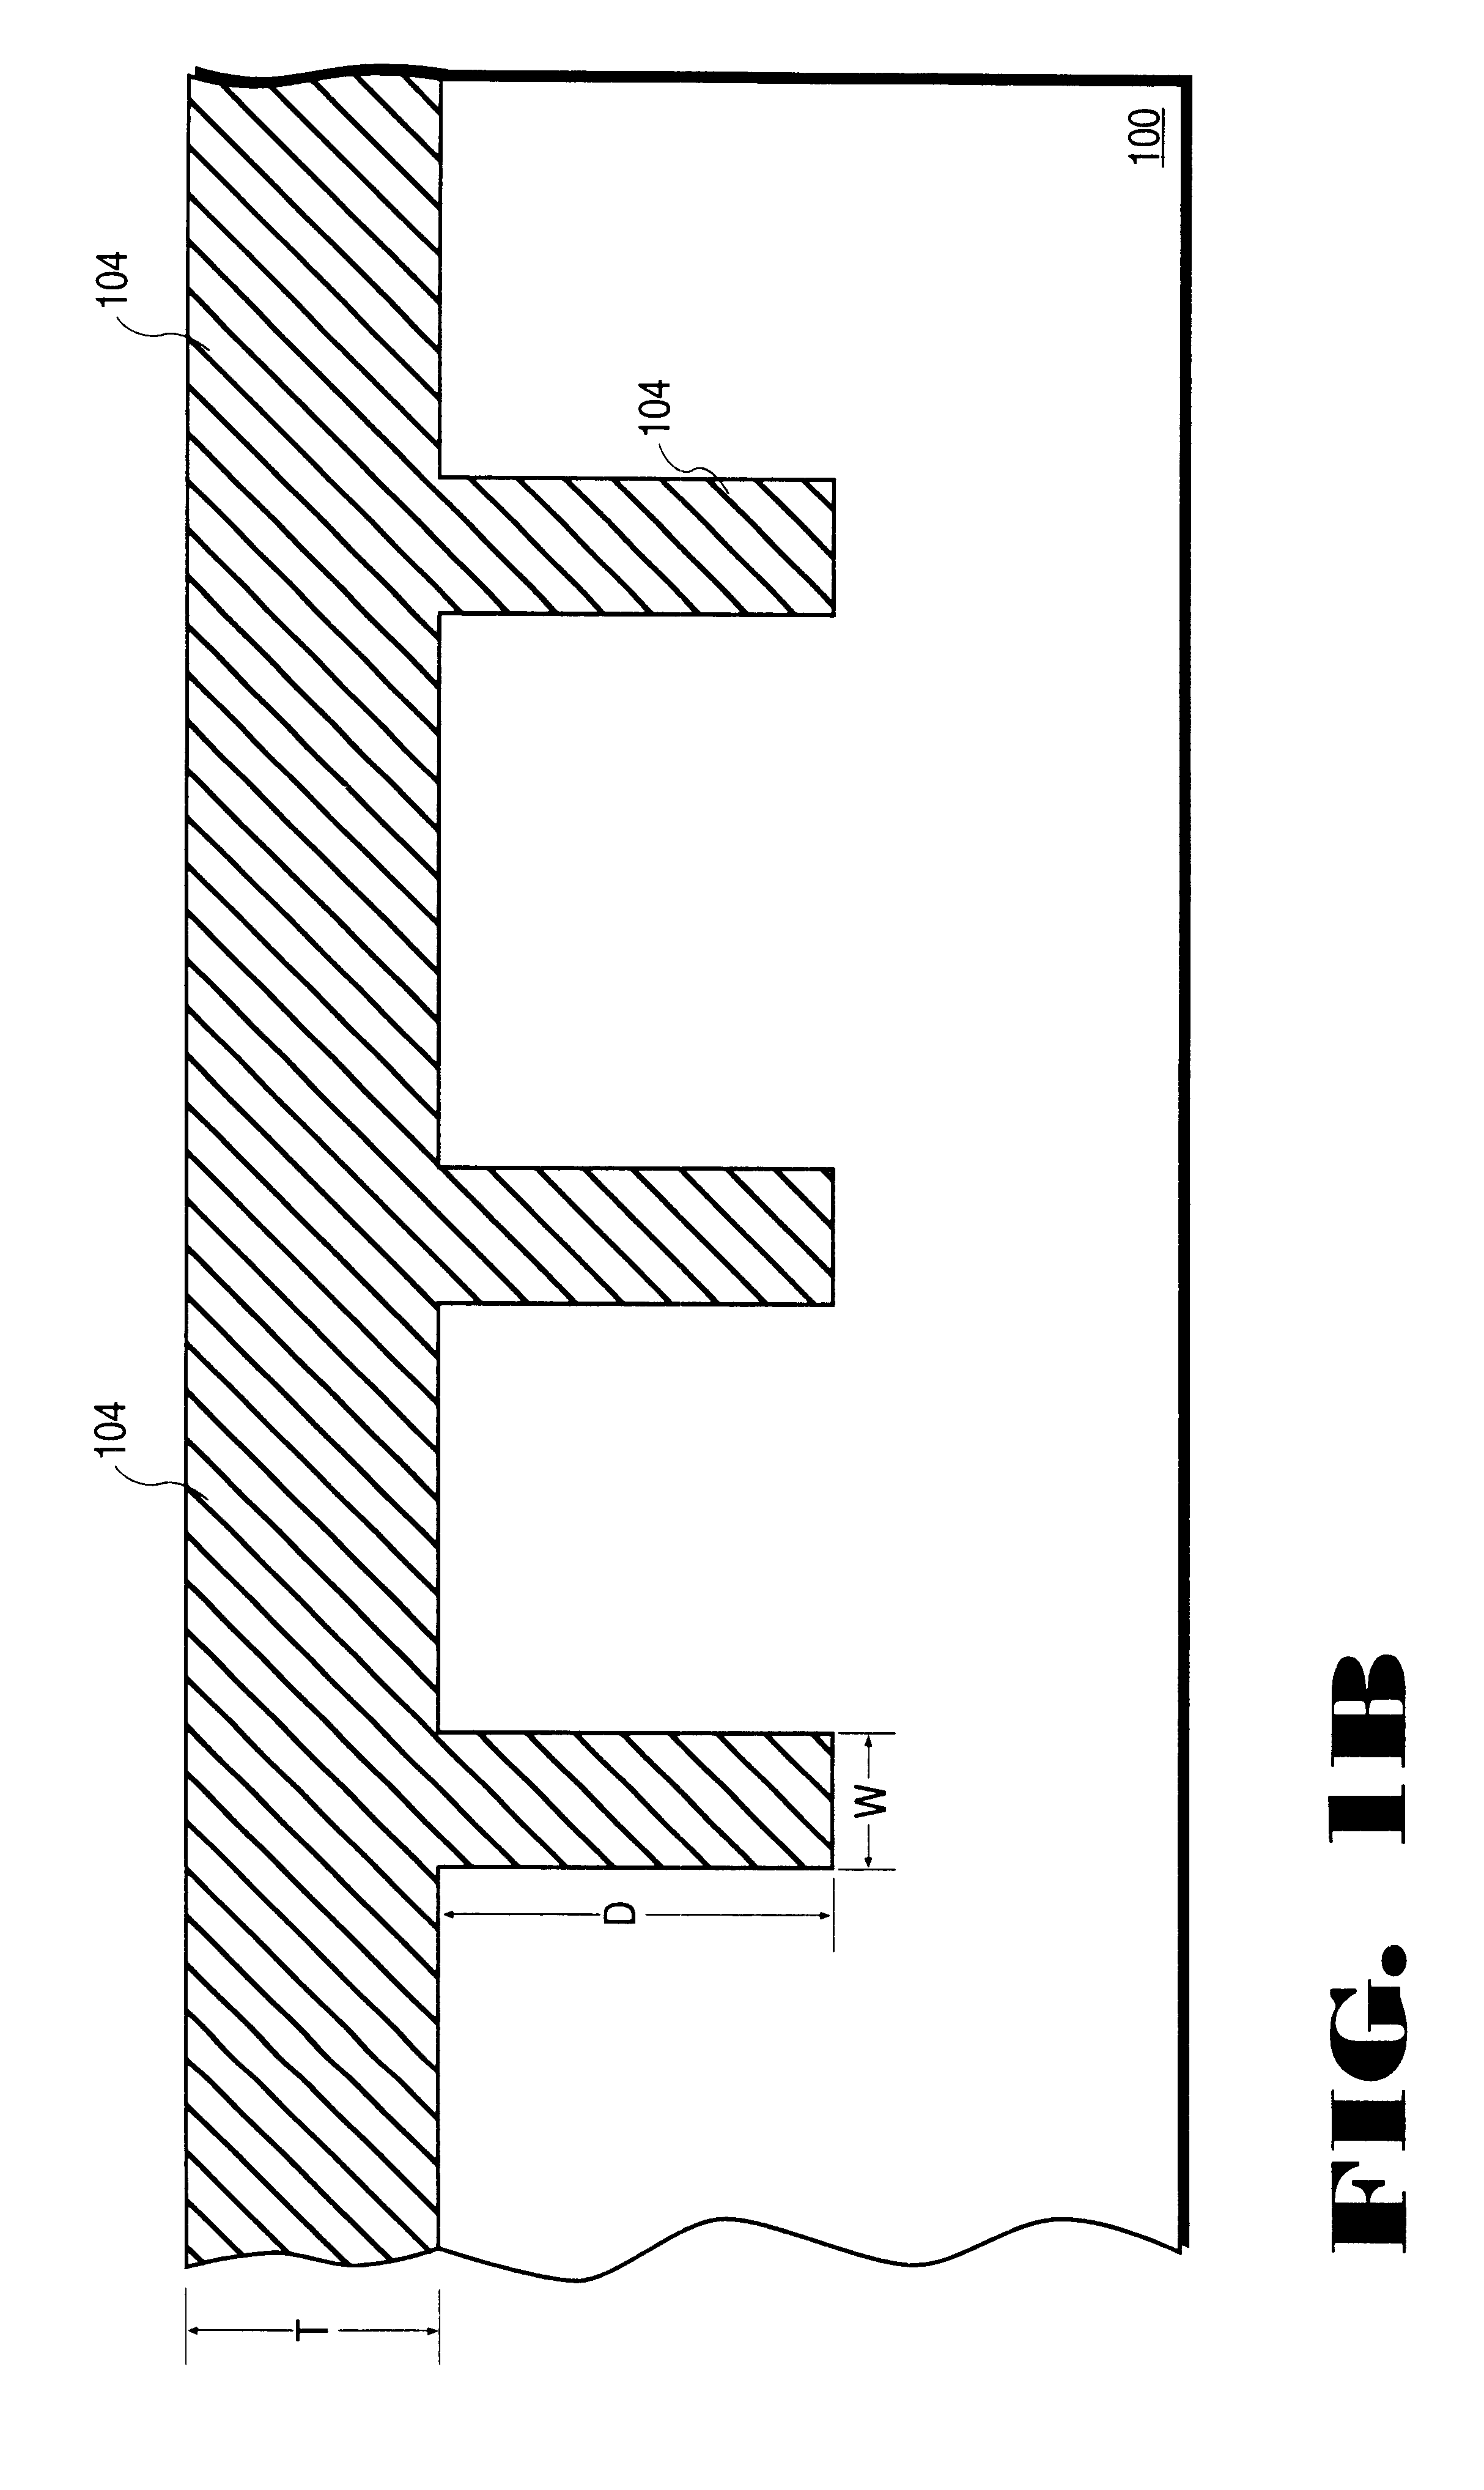 Method and apparatus for forming insitu boron doped polycrystalline and amorphous silicon films